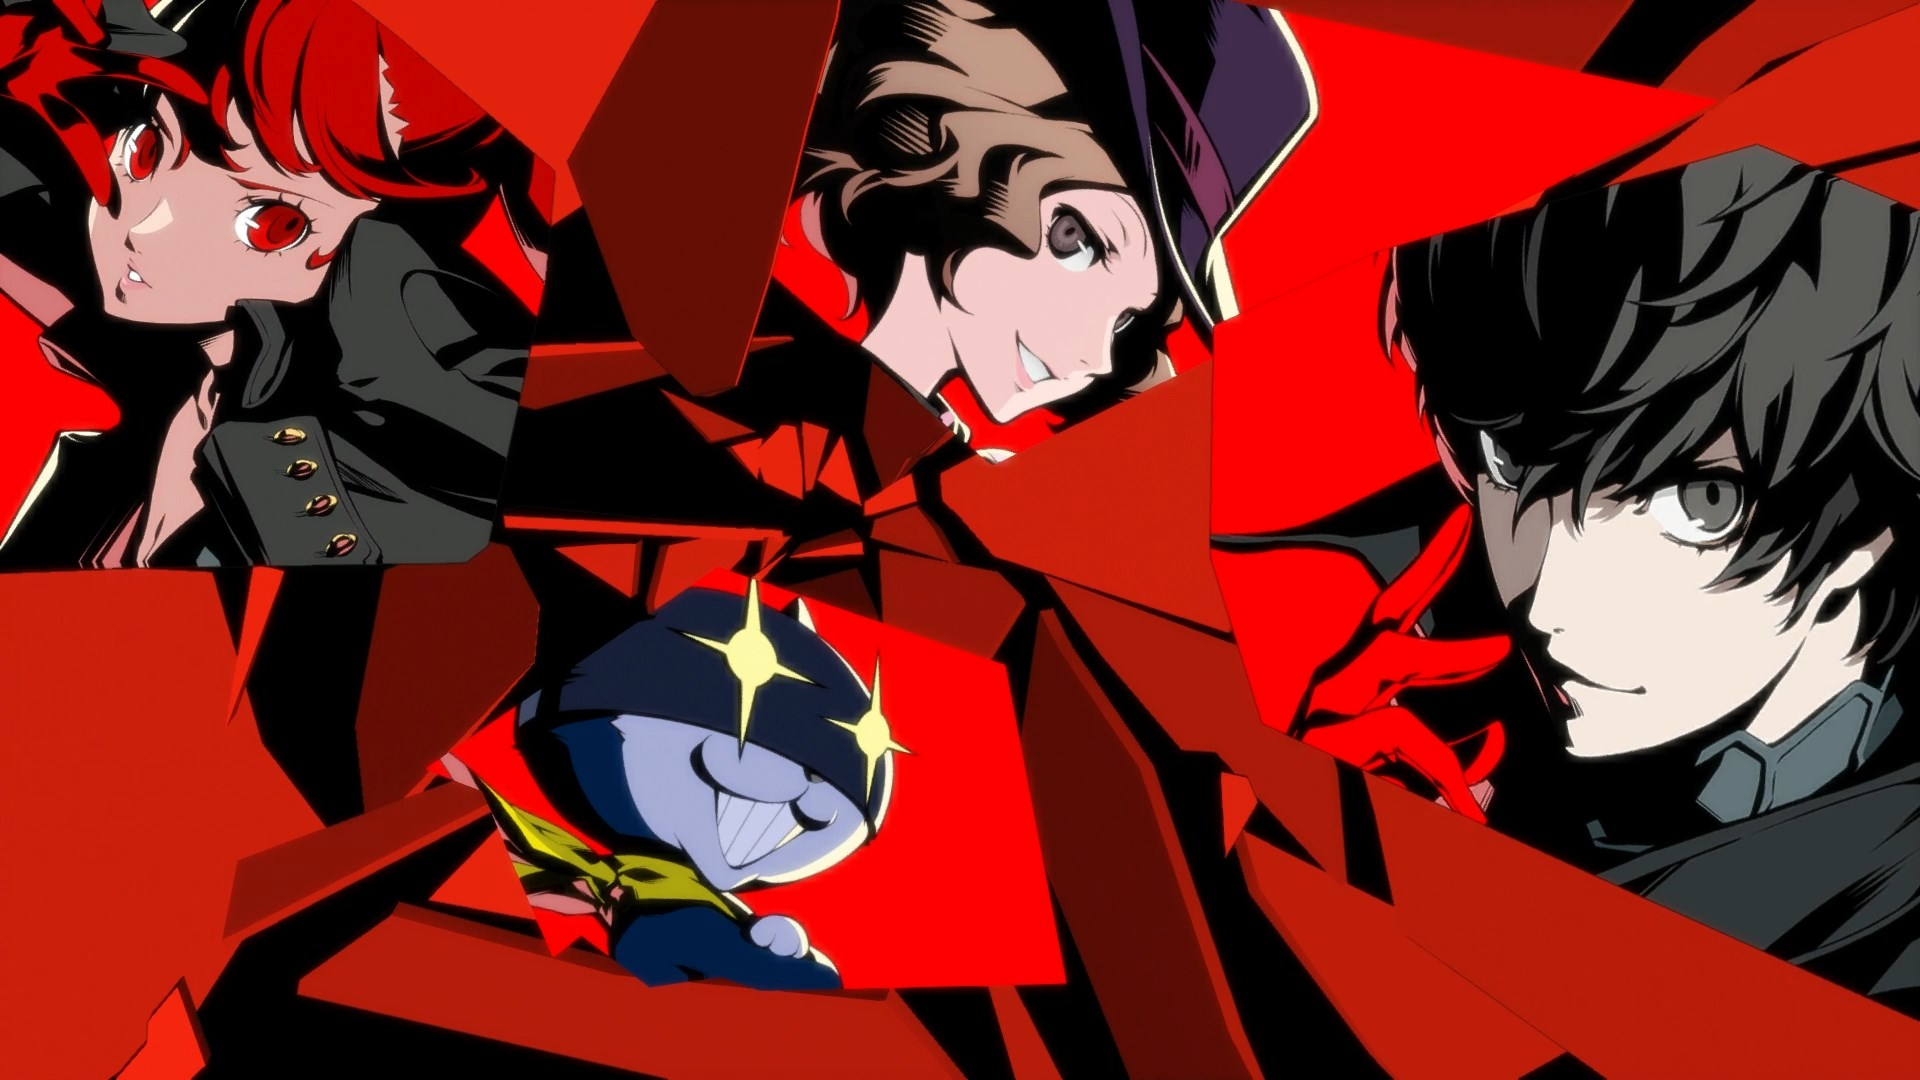 Persona 5 was originally available on the: